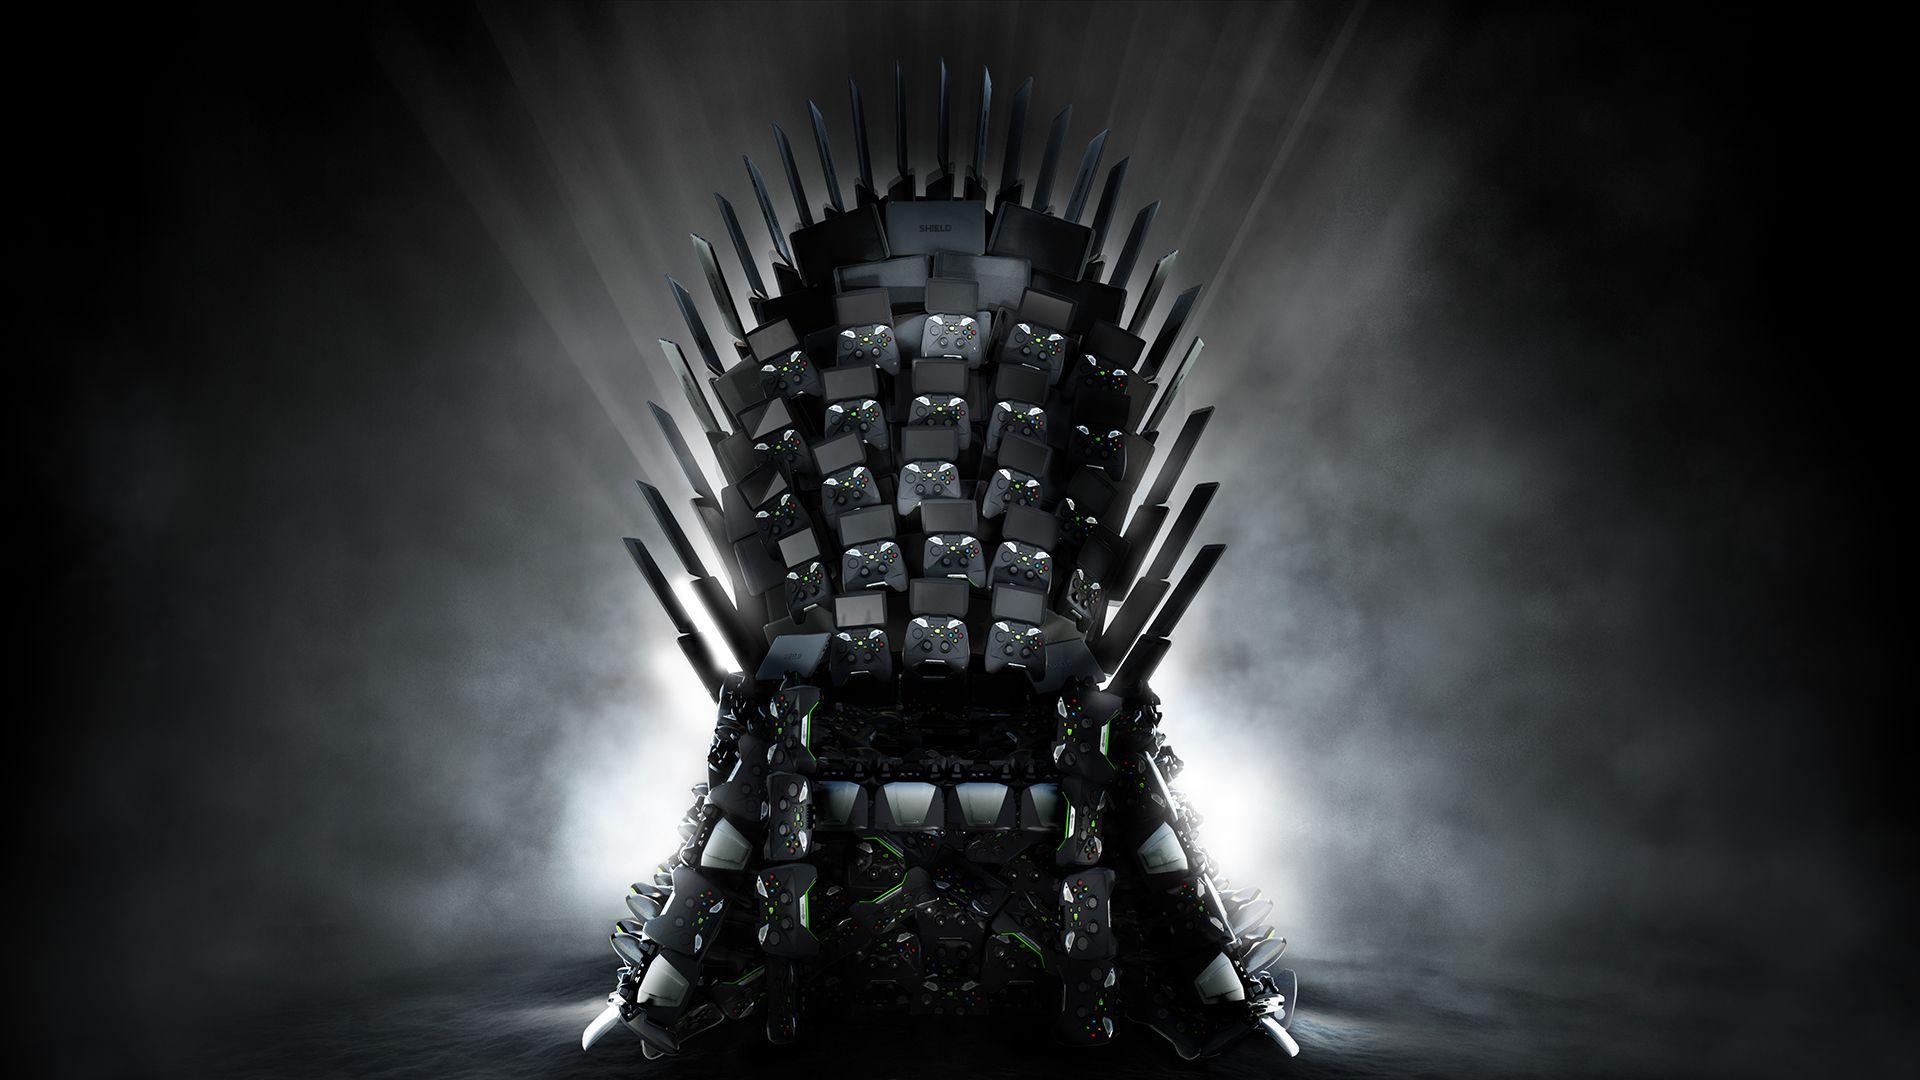 Chair Game Of Thrones 30 000 Game Of Thrones Life Sized Throne